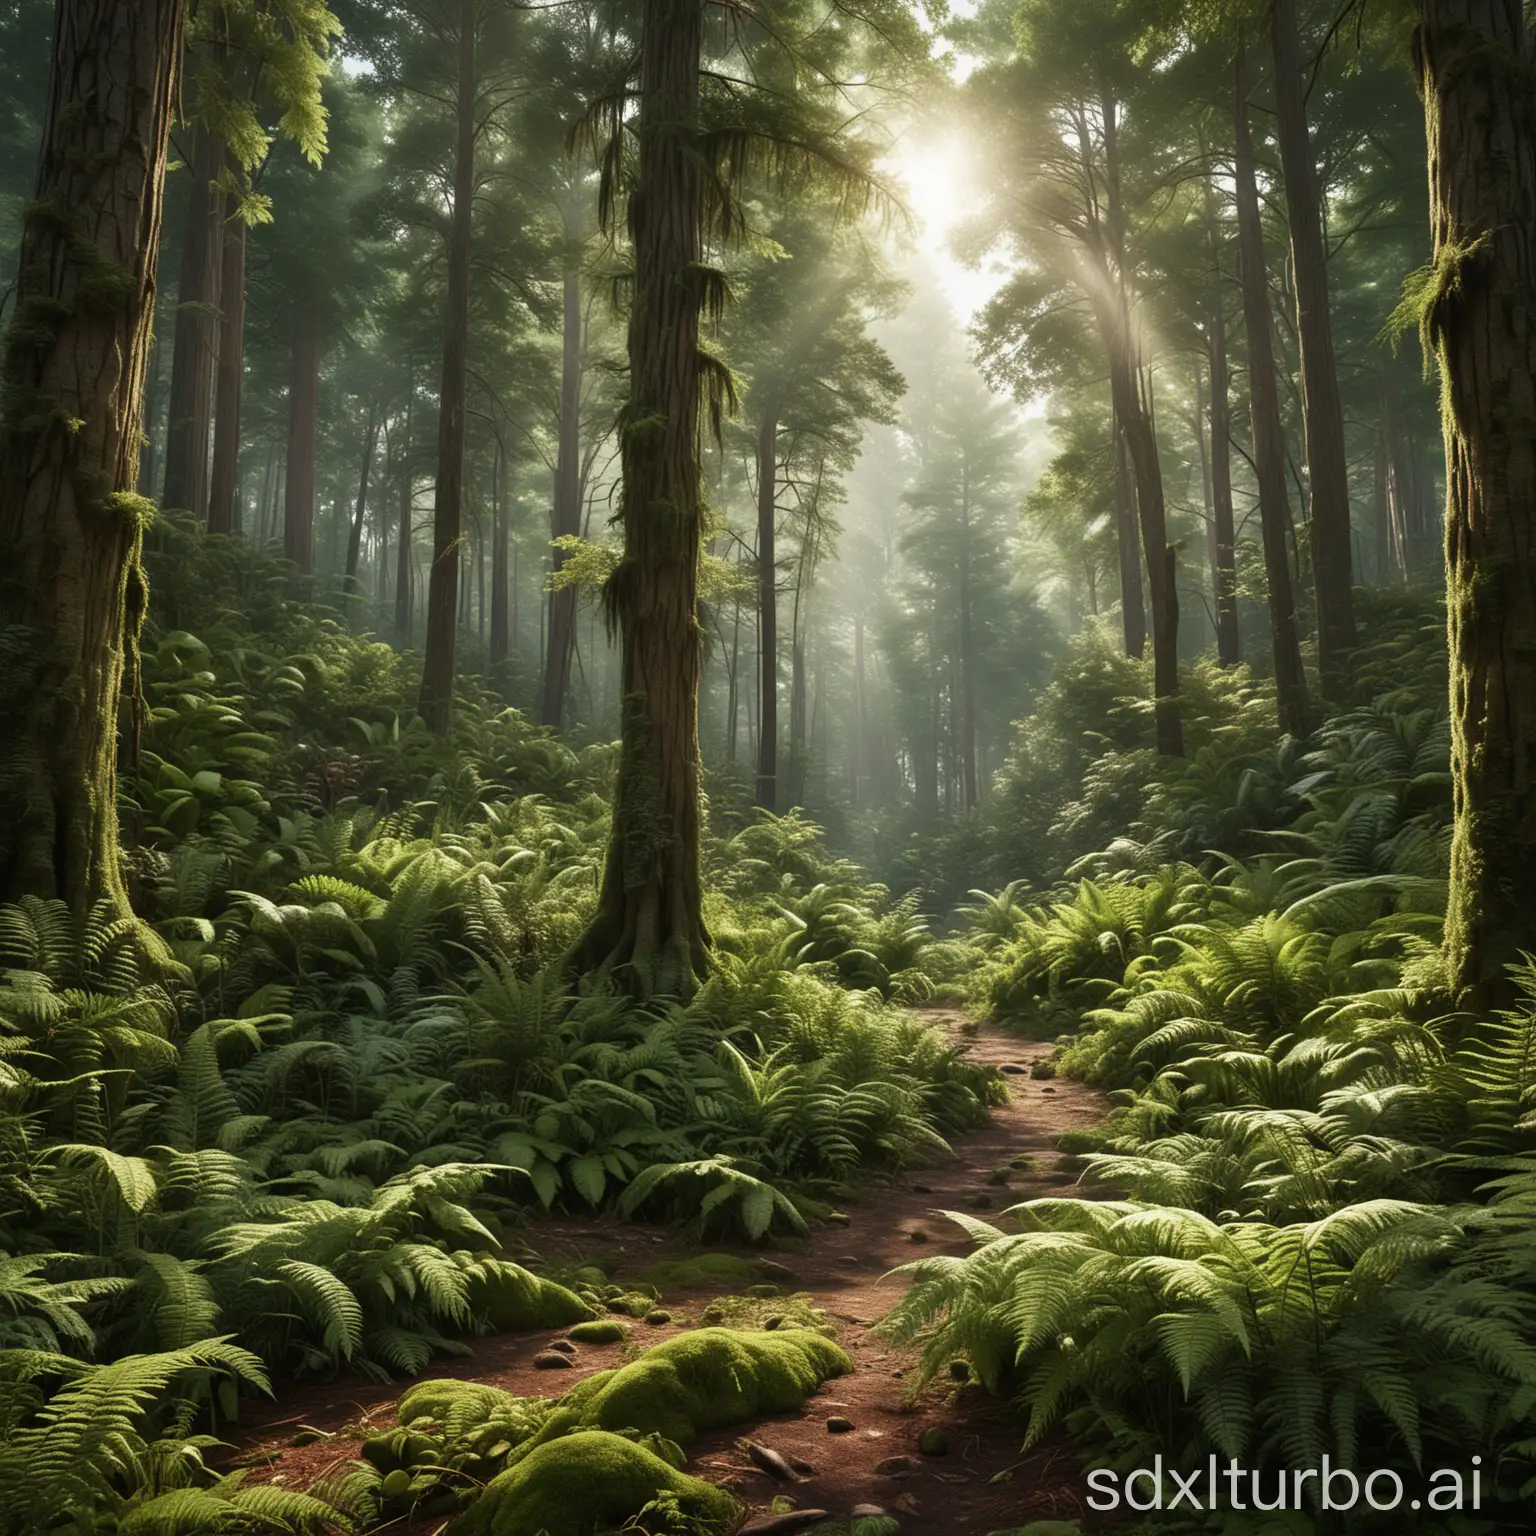 Create a highly detailed and realistic image of a lush forest. The forest should be dense with a variety of vibrant green foliage, featuring tall, huge trees such as giant sequoias and Douglas-firs. The scene should include rays of sunlight filtering through the canopy, casting dappled light on the forest floor covered with ferns and moss. The atmosphere should evoke a sense of tranquility and untouched natural beauty, with a rich variety of plant life and textures.